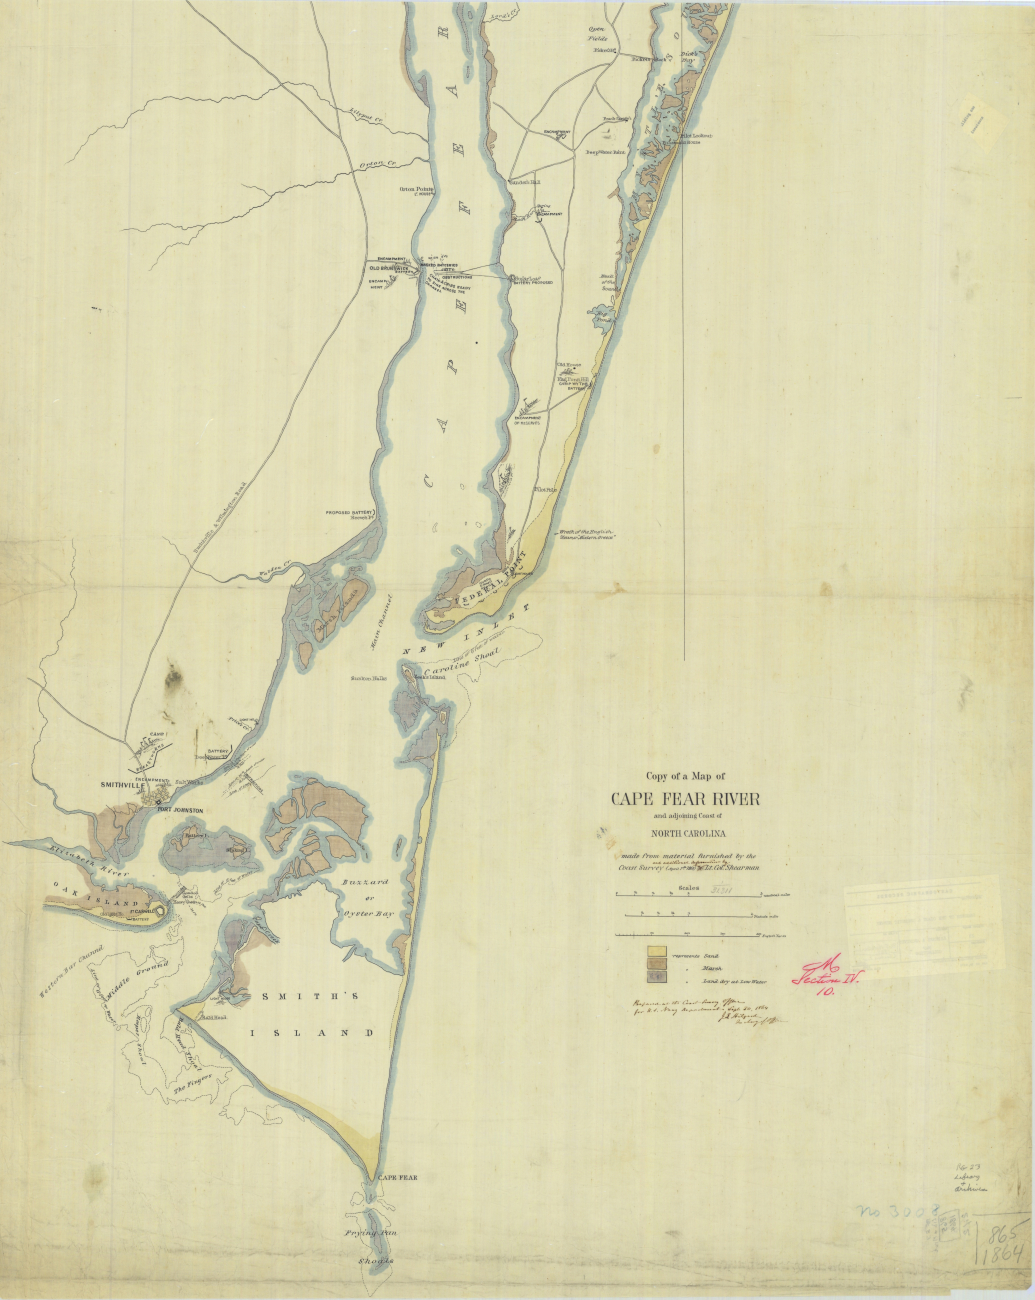 Copy of a map of Cape Fear River and adjoining Coast of North Carolina made frommaterial furnished by the U